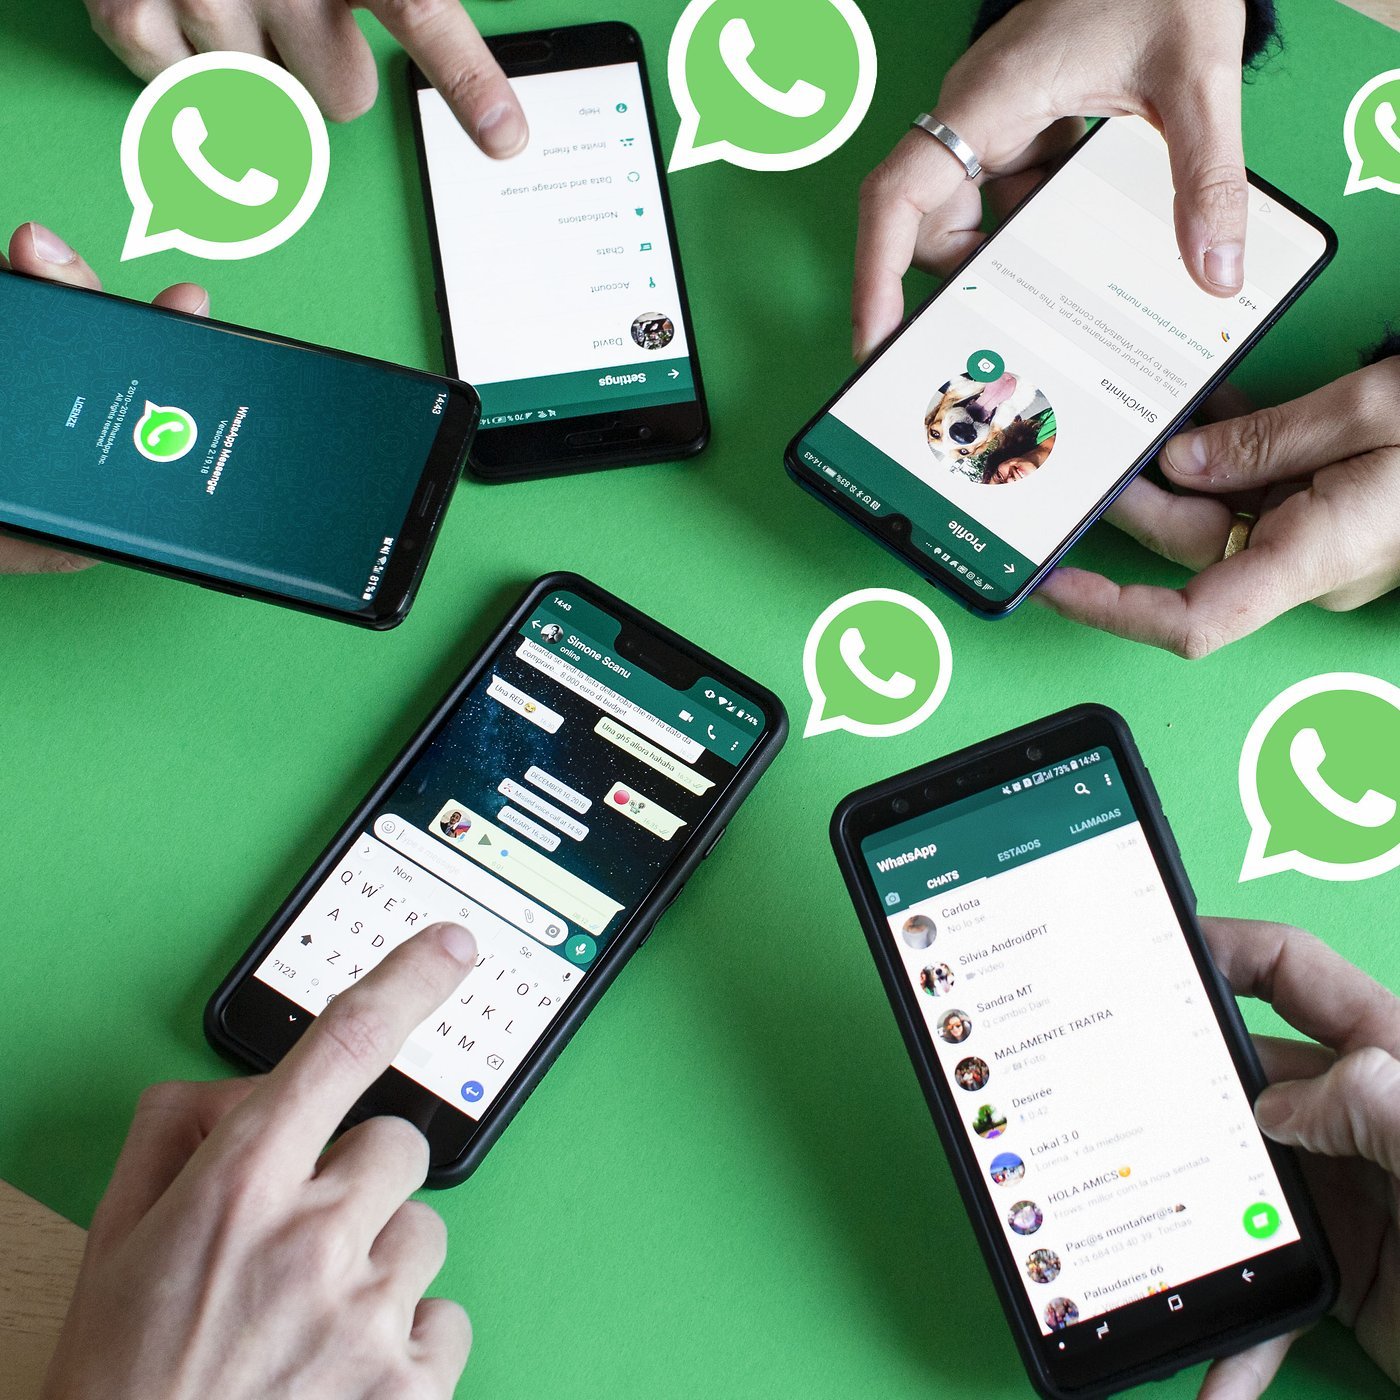 WhatsApp rolls out new disappearing feature for photos and videos